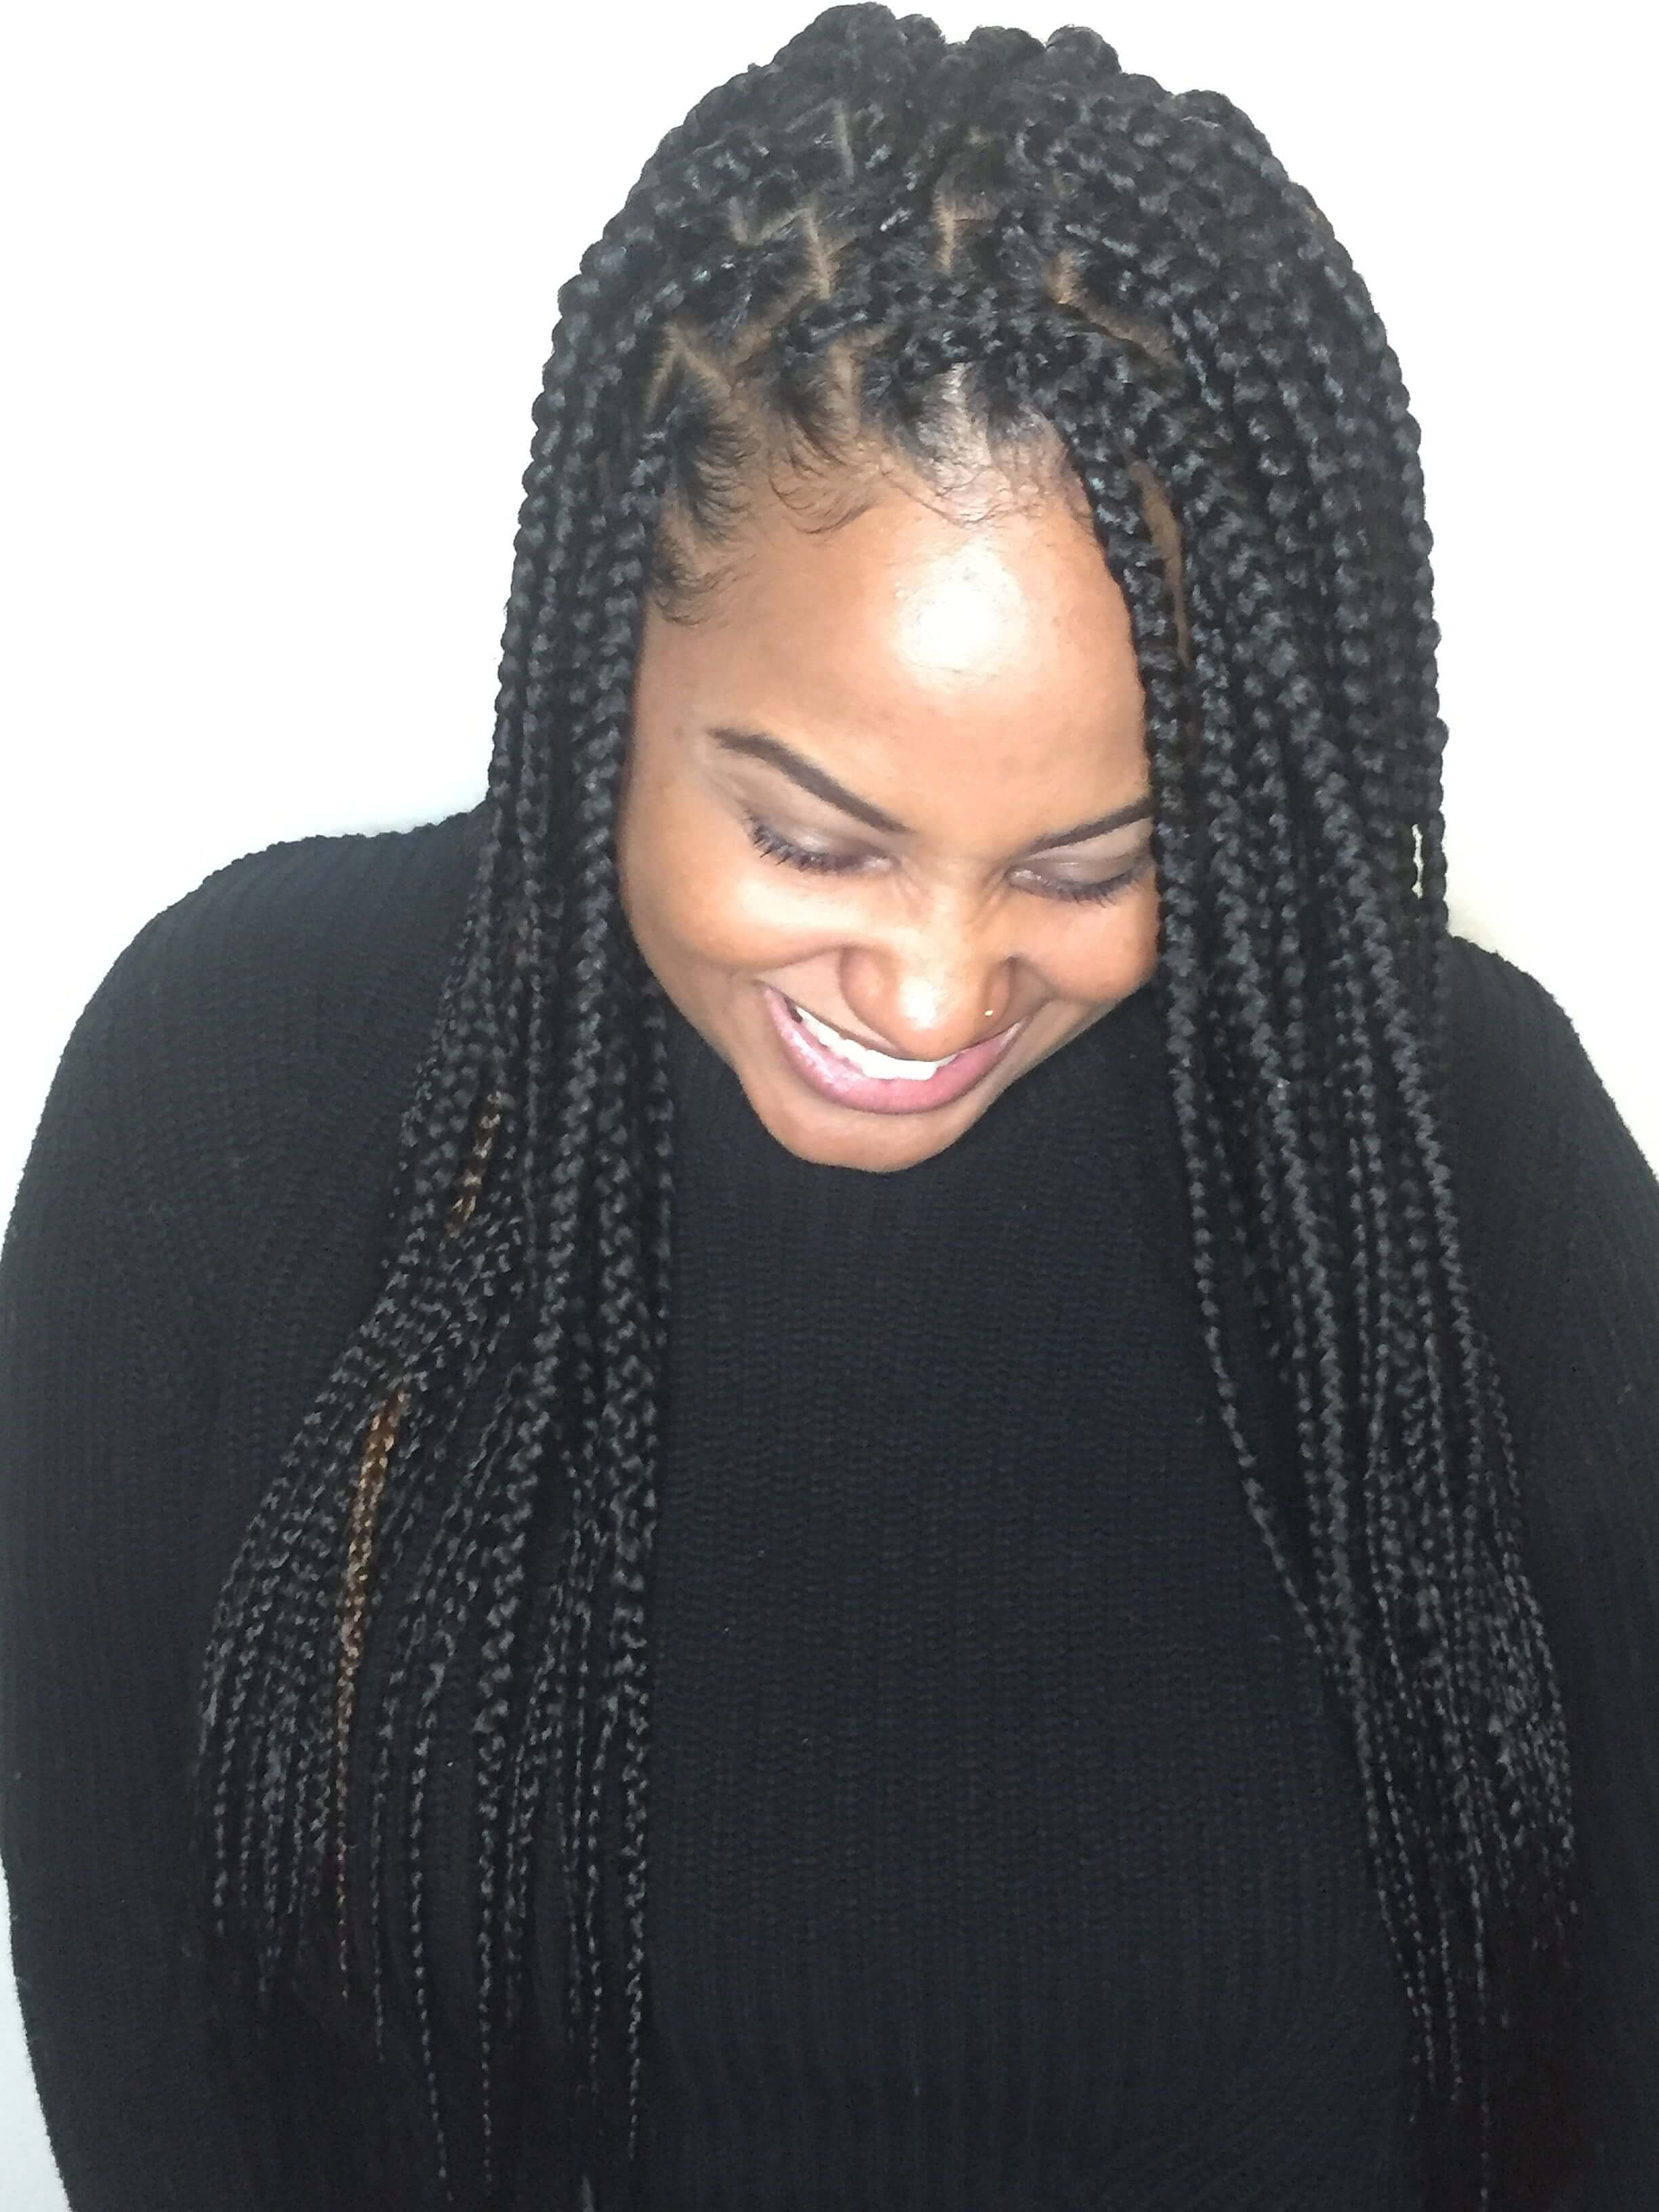 Medium Size Knotless Box Braids Styles Knotless Box Braids Give A More Natural Finish And Look 